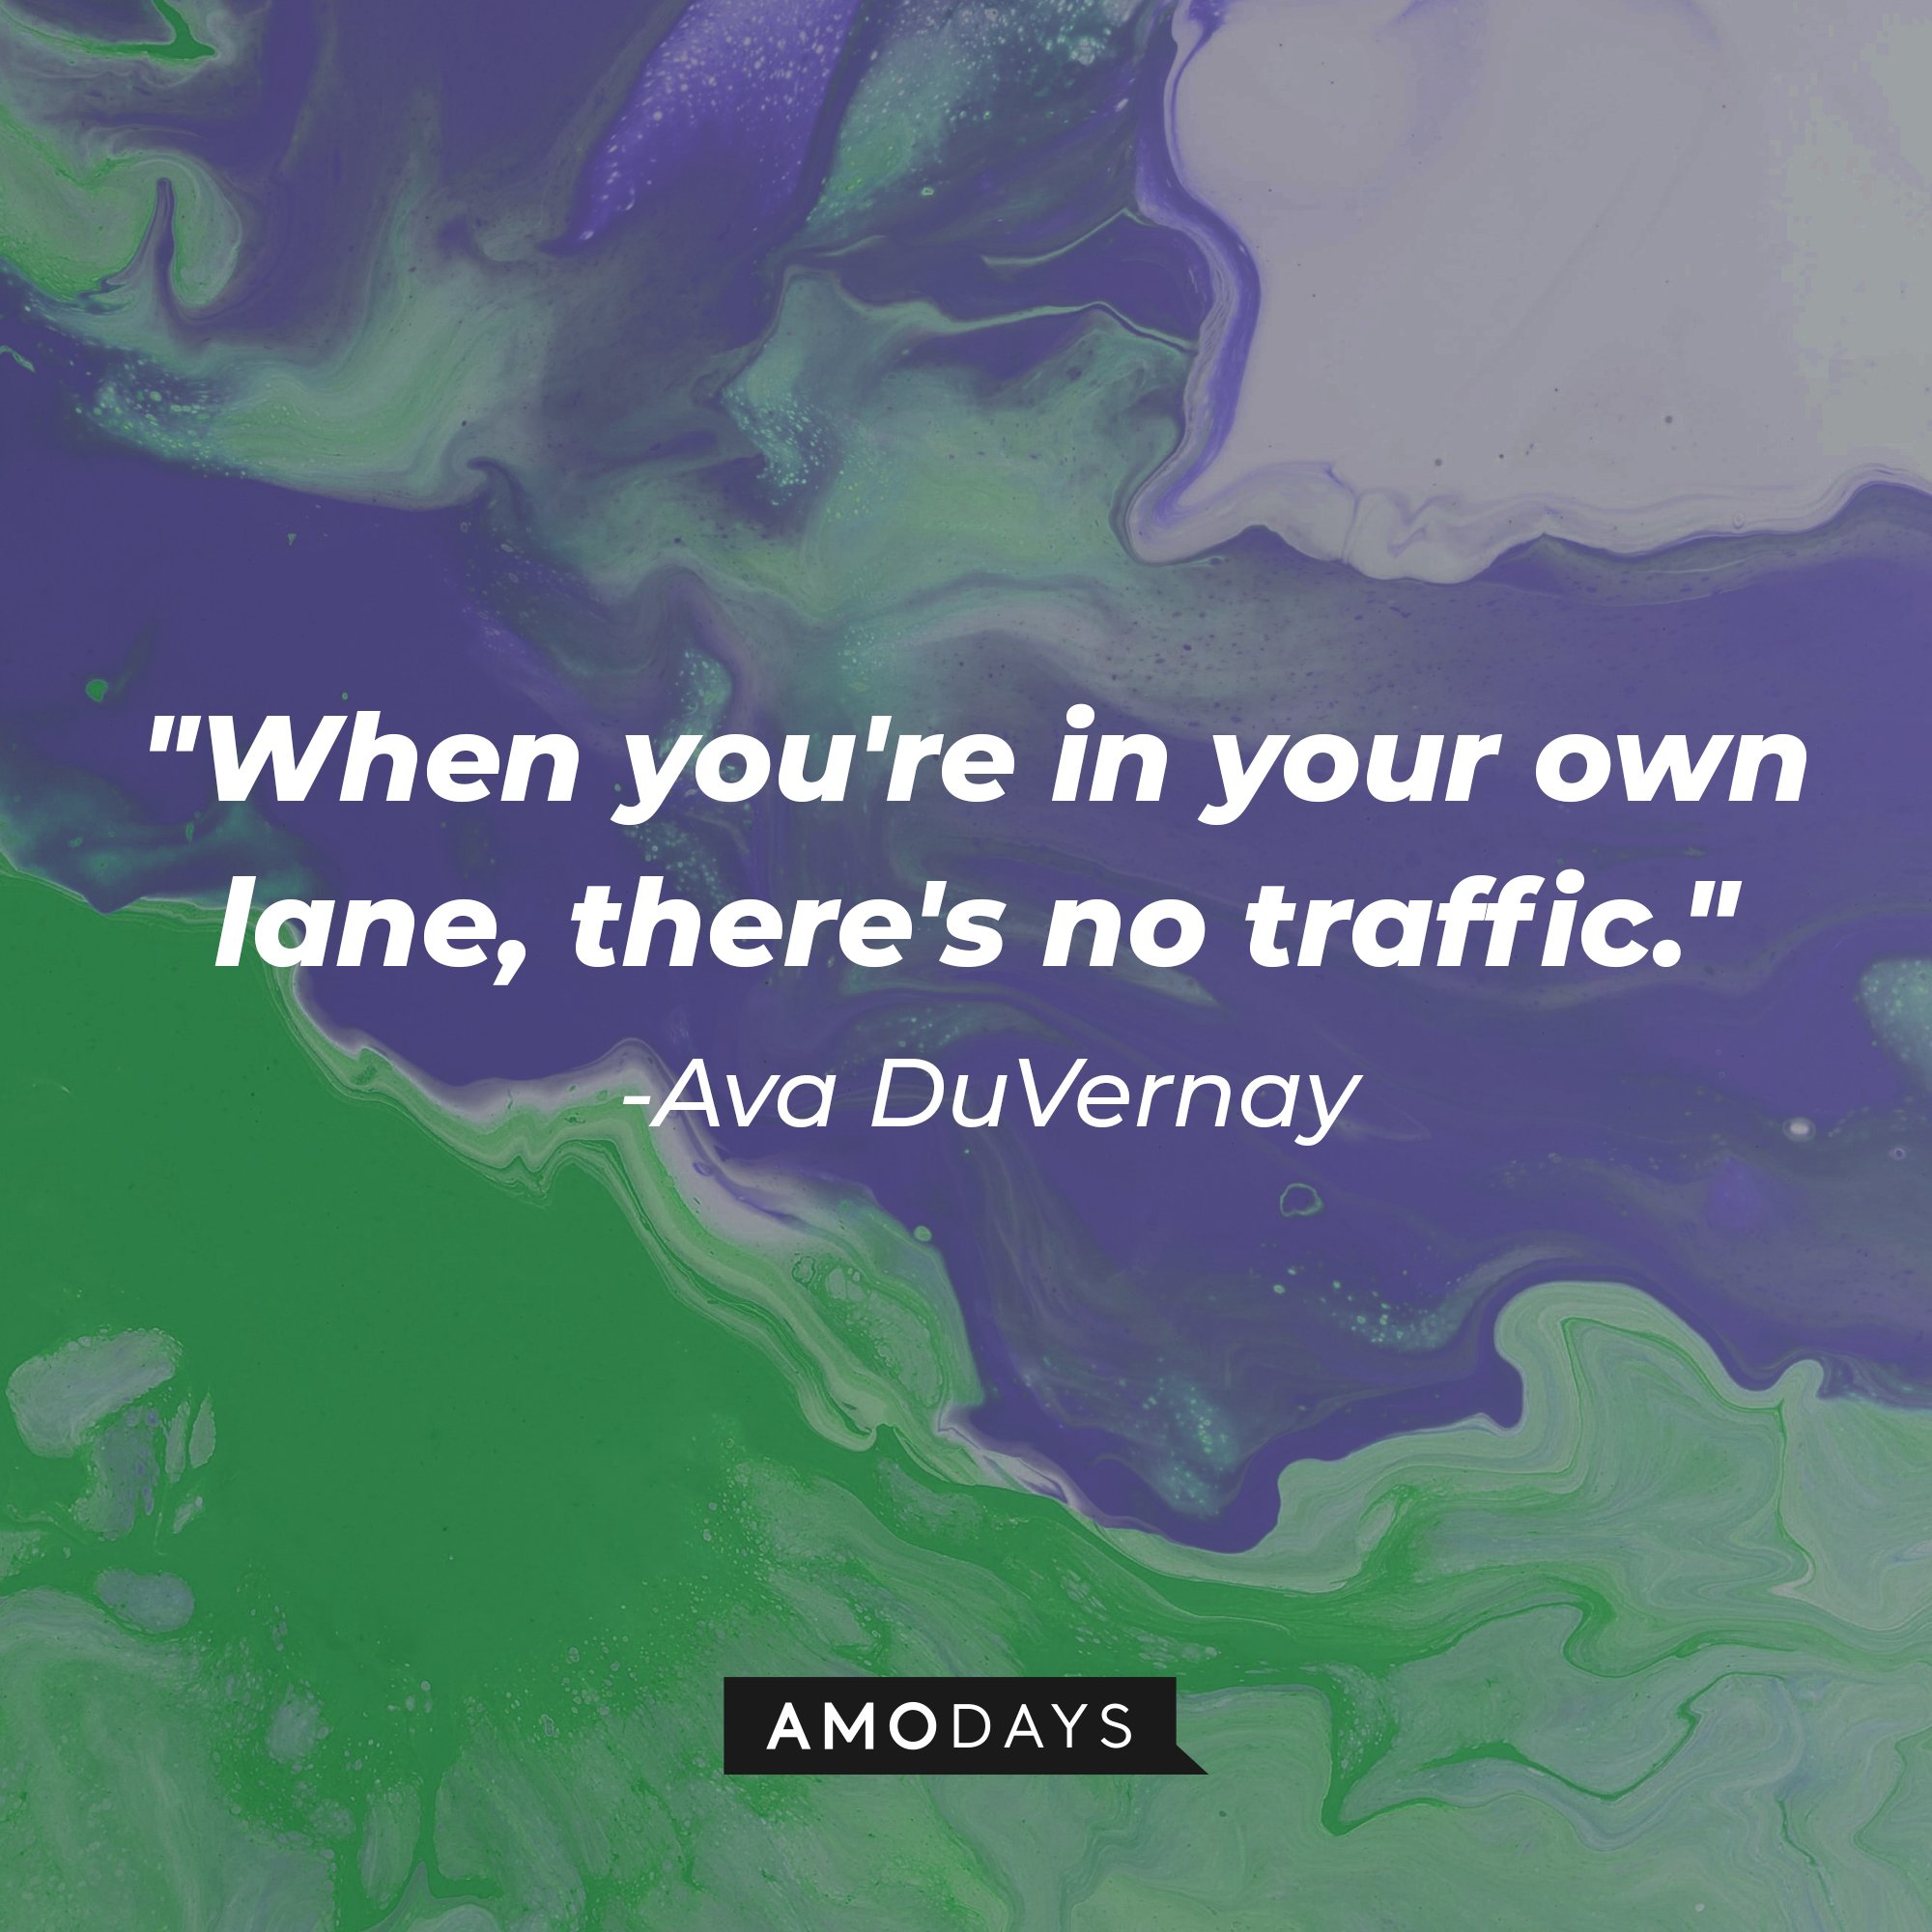 Ava DuVernay’s quote: "When you're in your own lane, there's no traffic." | Image: AmoDays